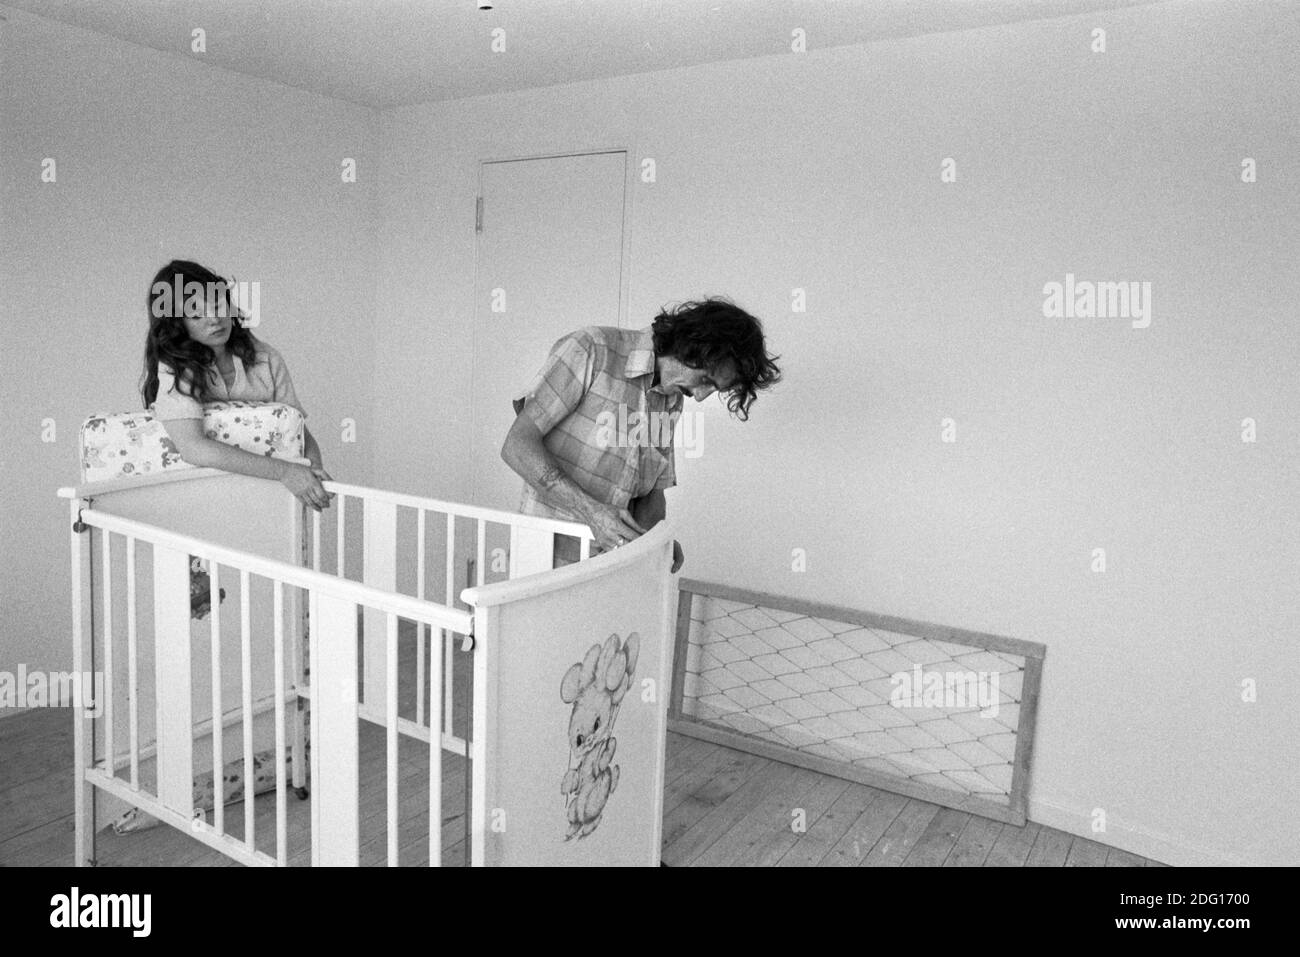 Putting up the babys cot, father eldest daughter they have just moved into a new family home. The removal men have left and they are getting everything ready for their first night in the new family home. New estate UK 1977 1970s Milton Keynes, Buckinghamshire HOMER SYKES. Stock Photo